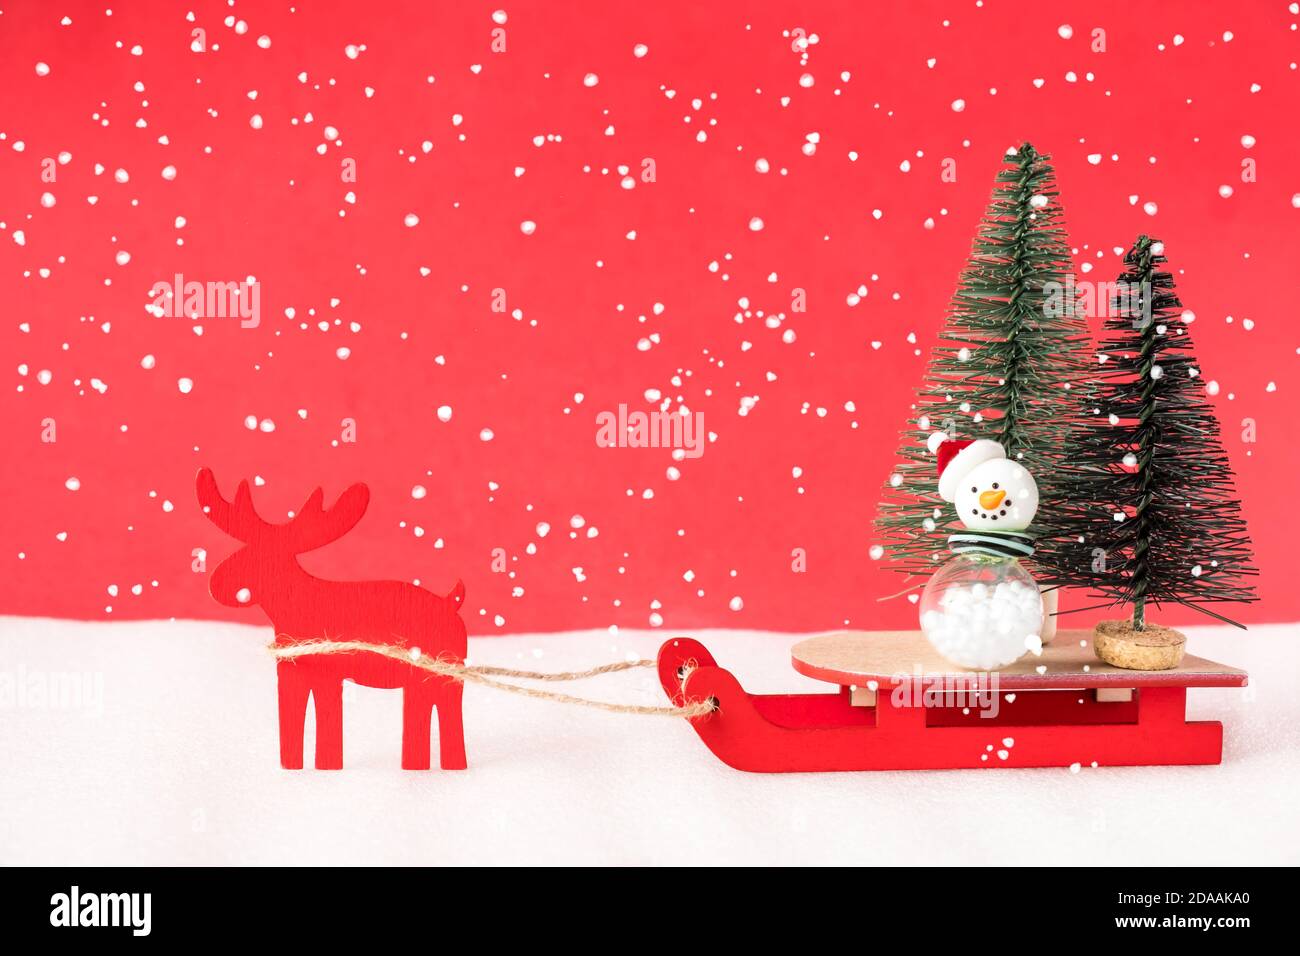 Toy reindeer and sleigh delivering christmas trees on red background. Stock Photo